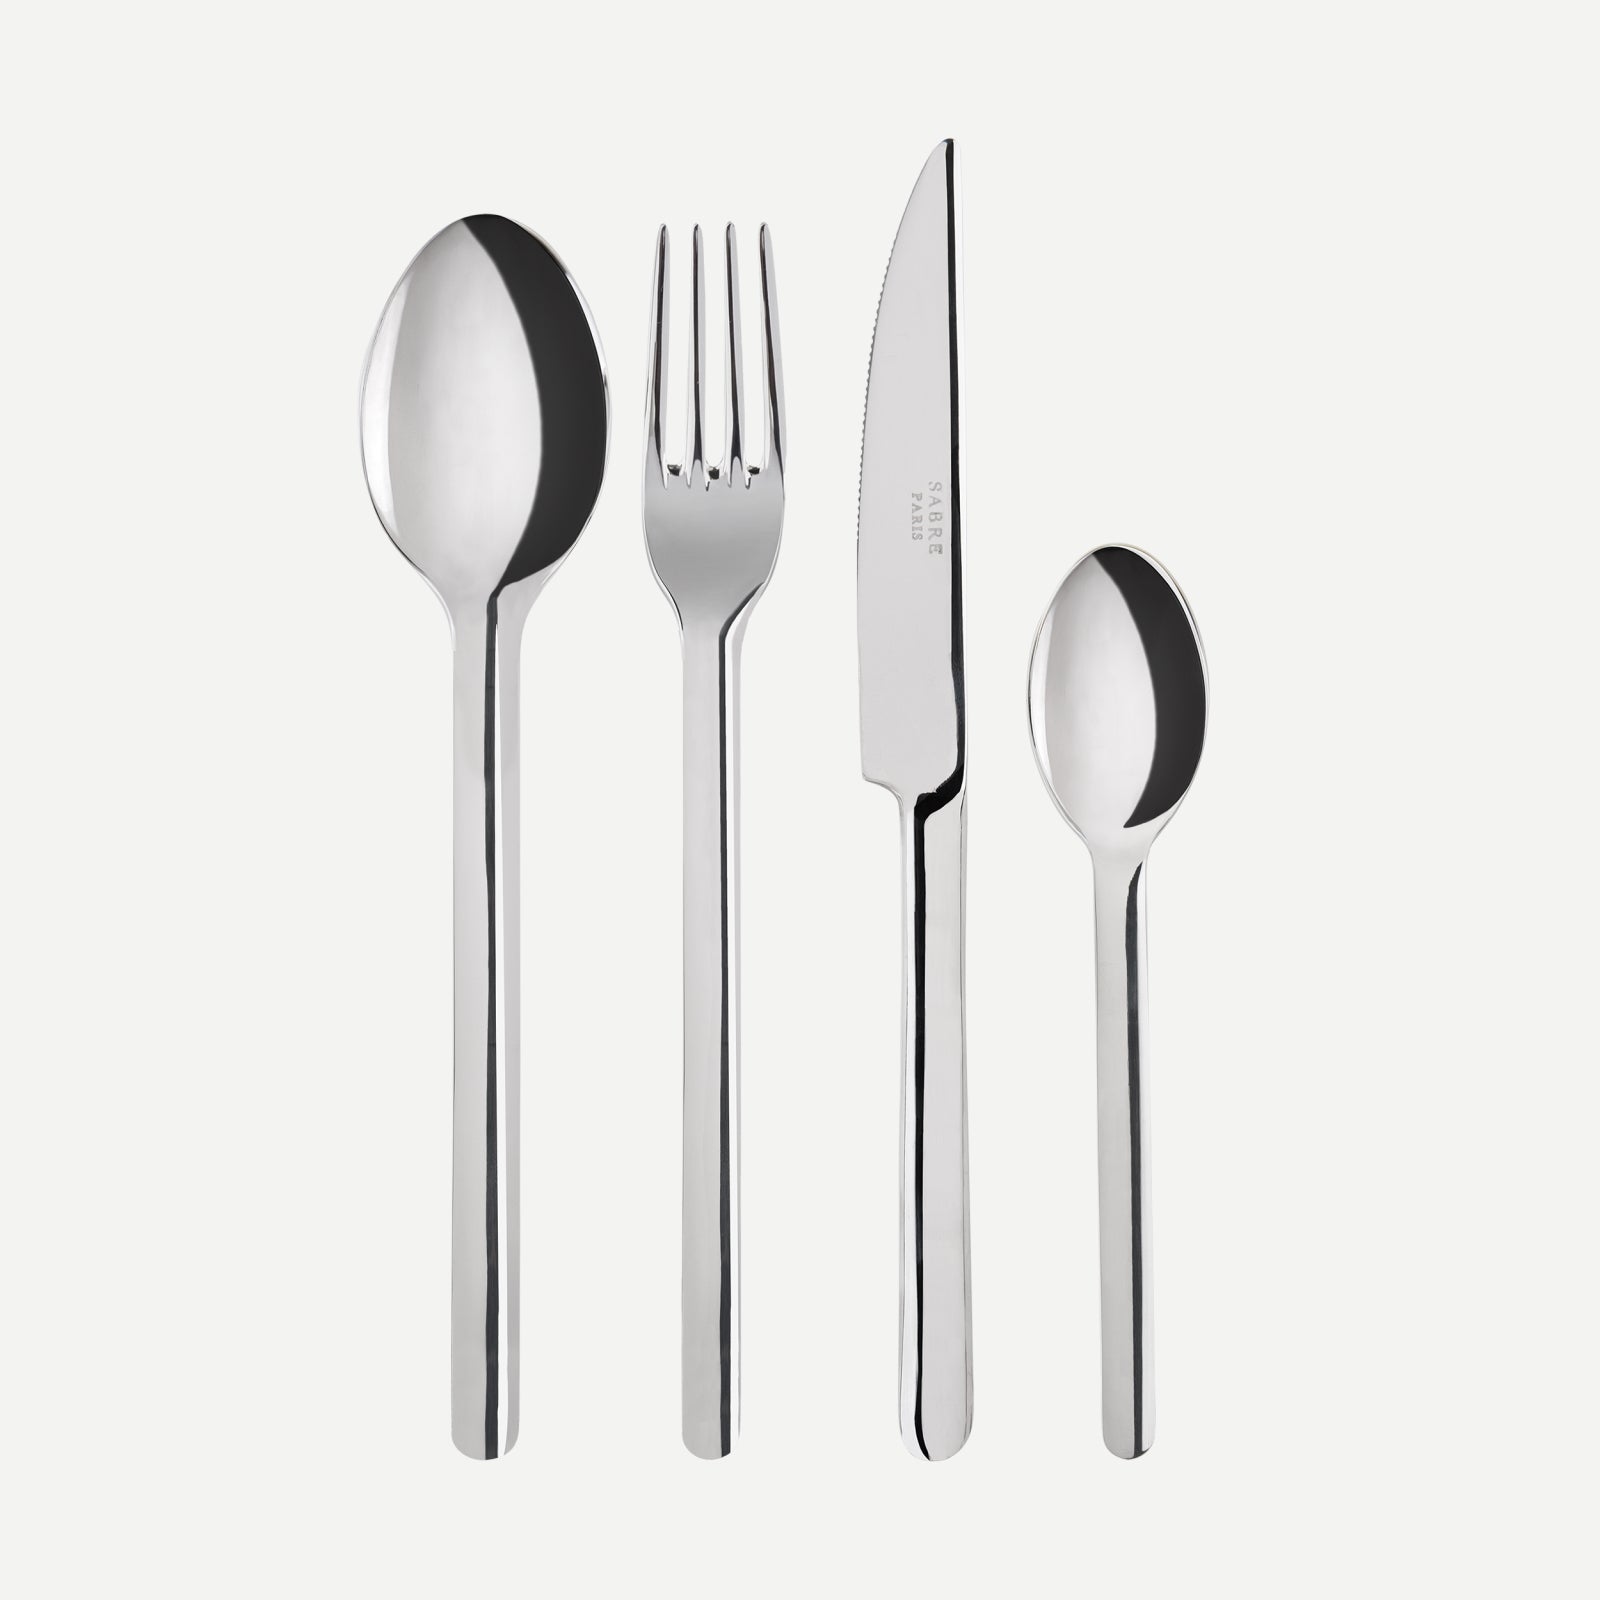 Set of 4 pieces - Loft - Stainless steel